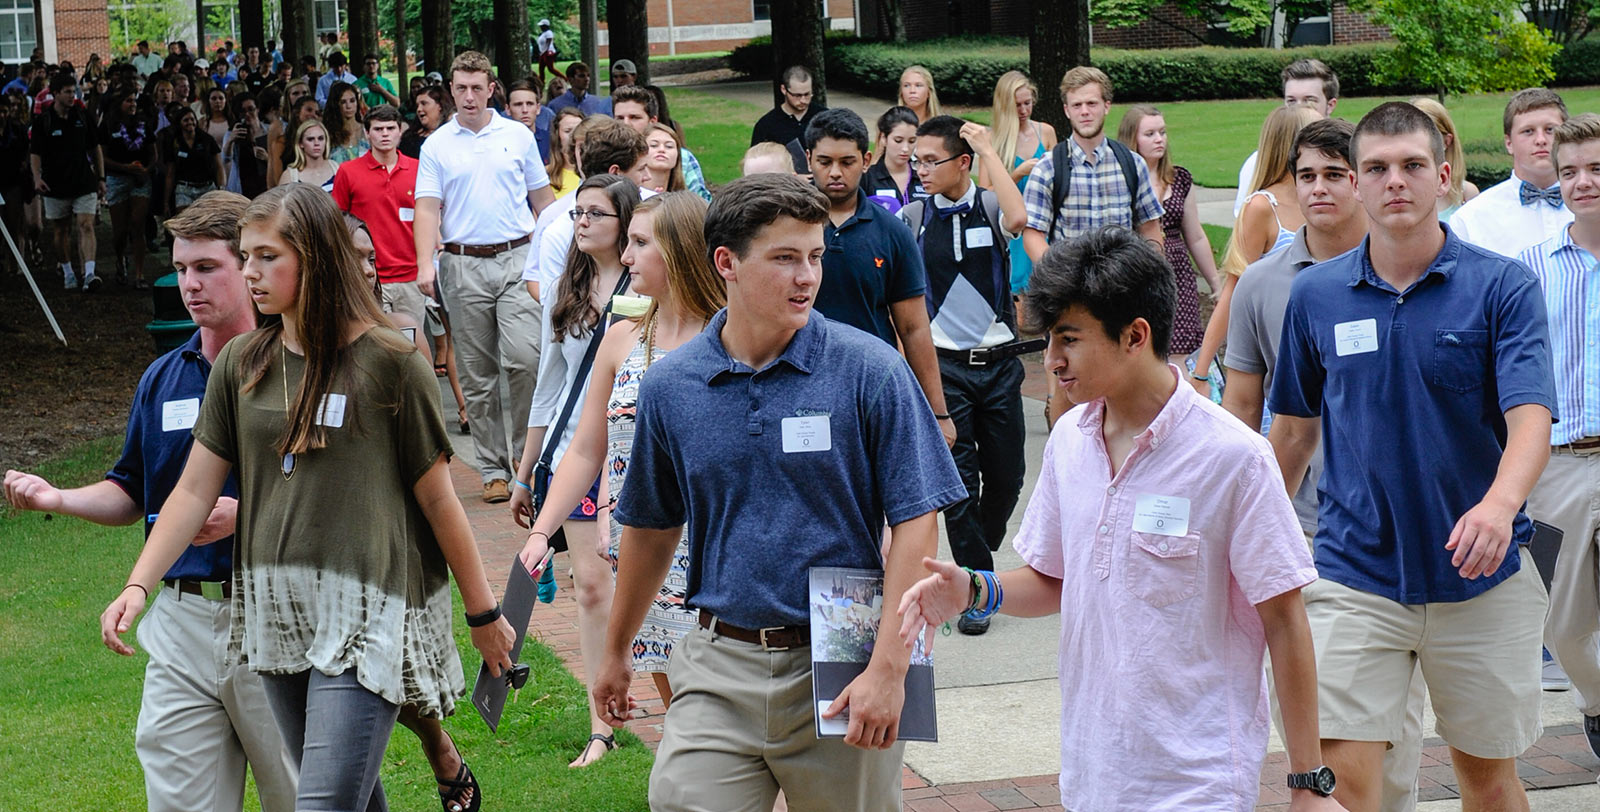 Select ’Southern: BSC’s premier open house for admitted students